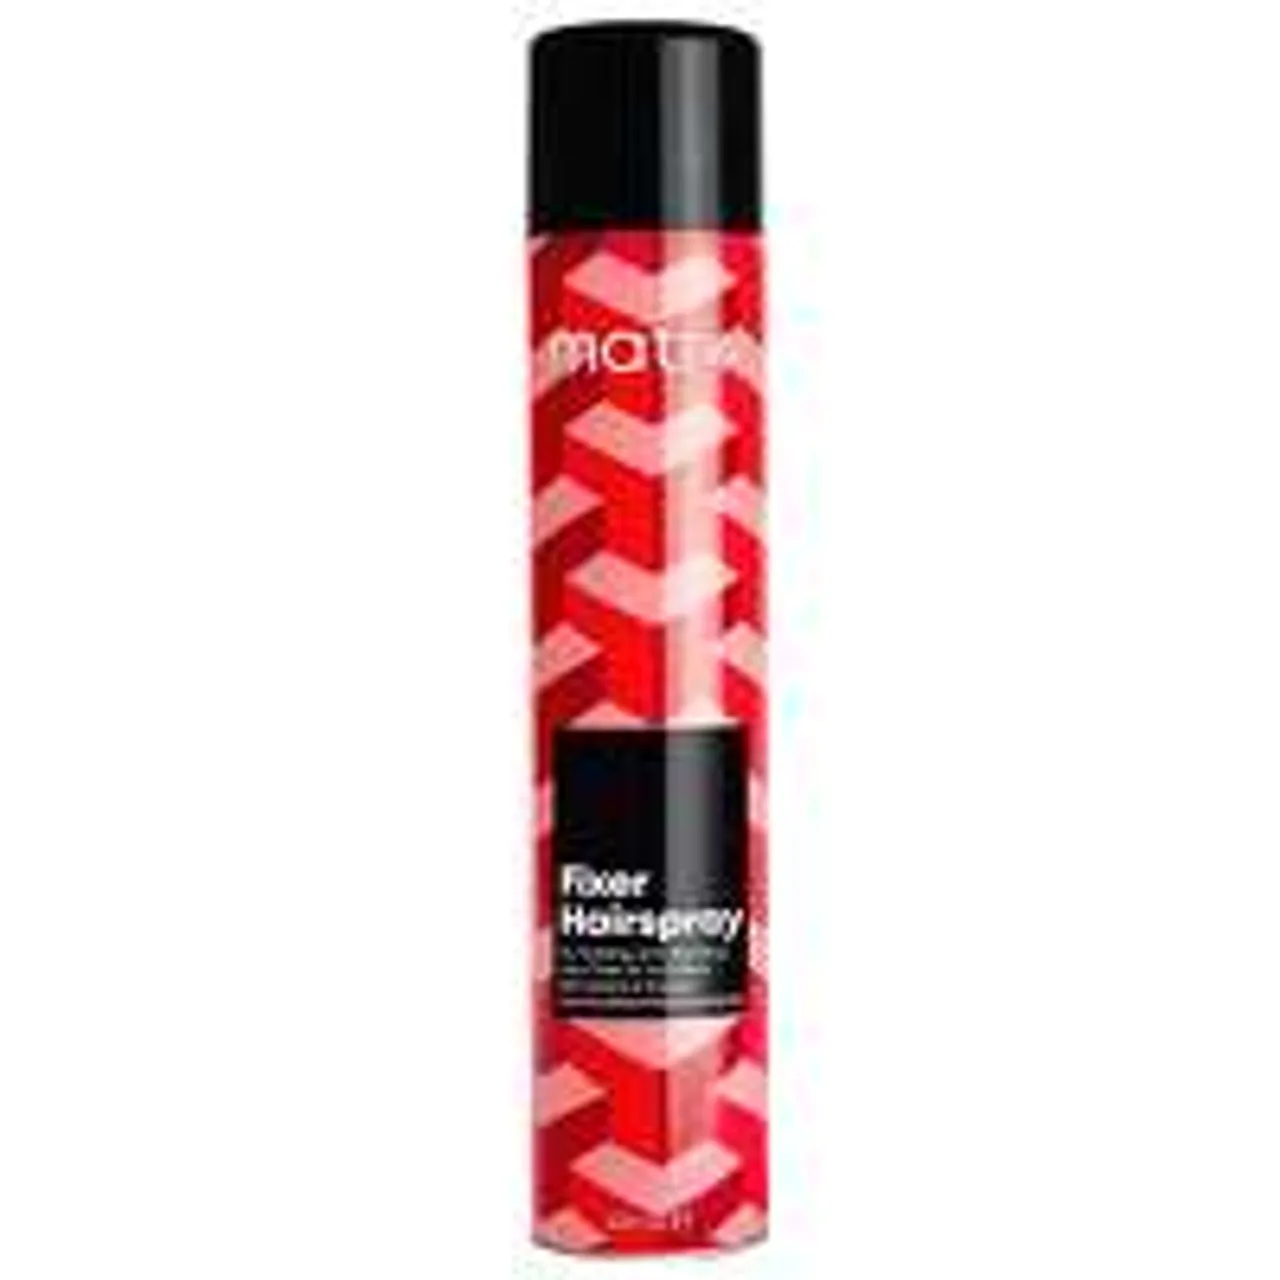 Matrix Styling Fixer Hairspray For Flexible Holding and Securing With Dry Finish 400ml